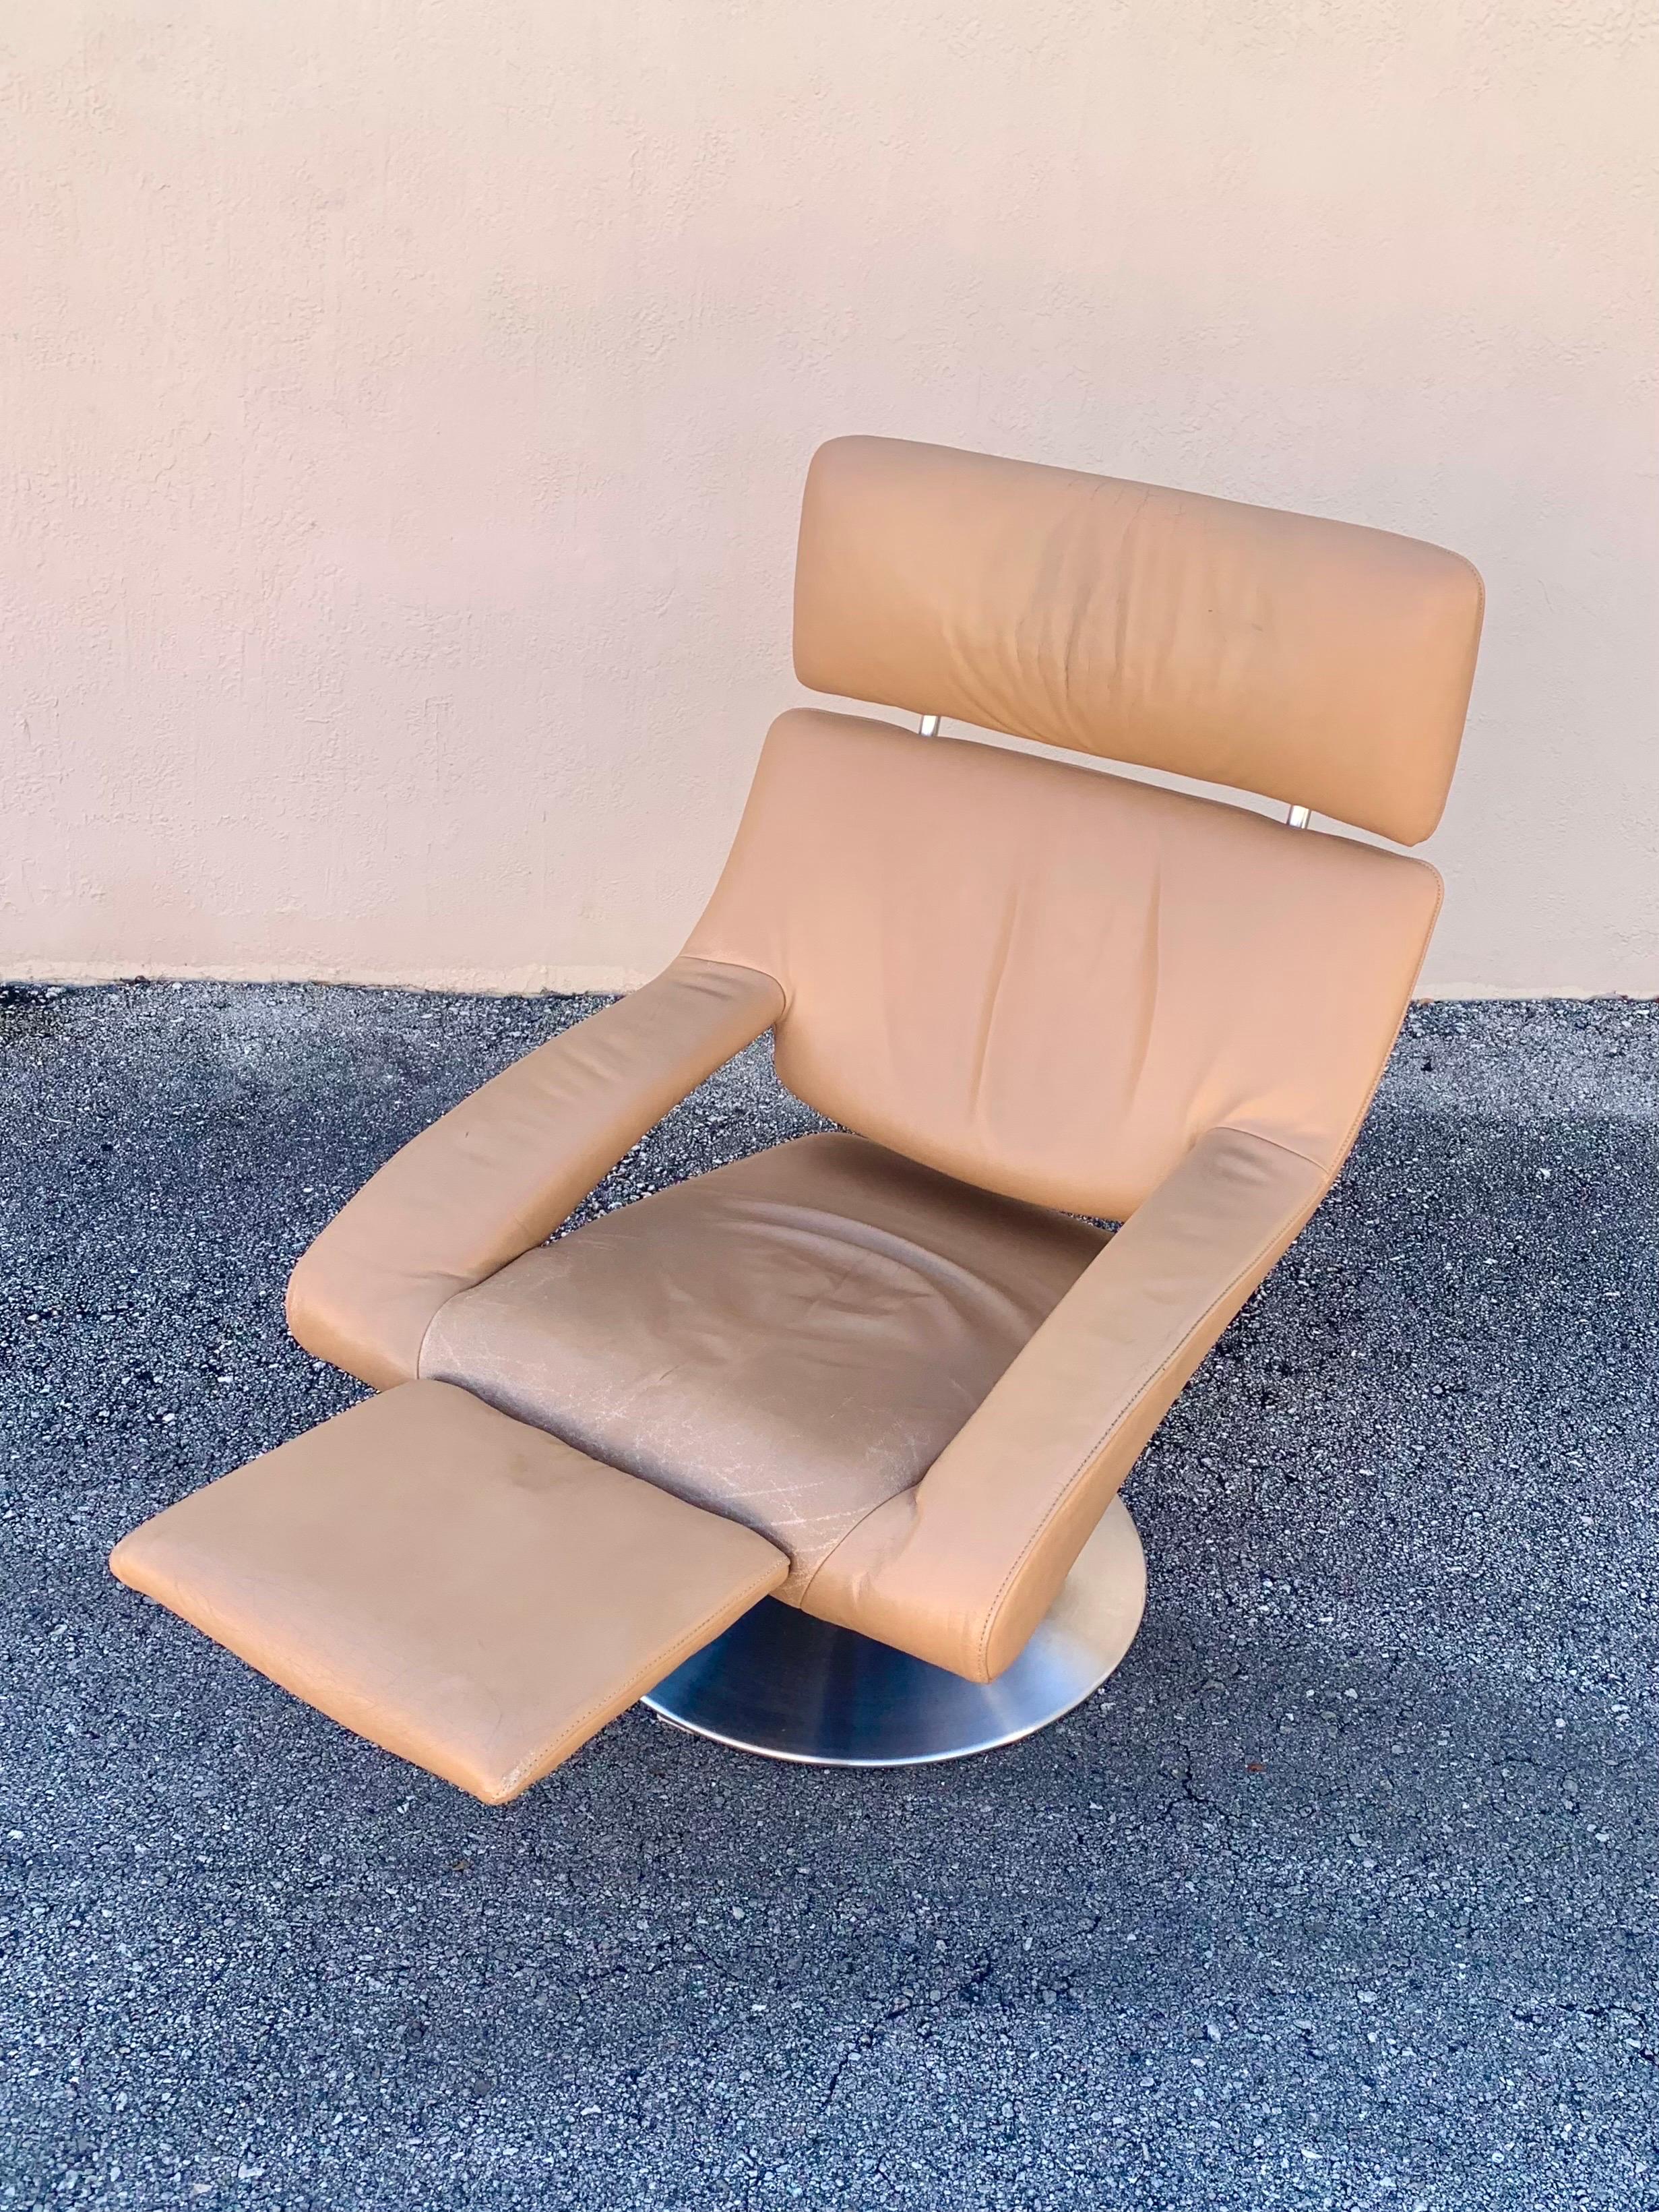 Swiss De Sede DS-255 Armchair in Leather Upholstery For Sale